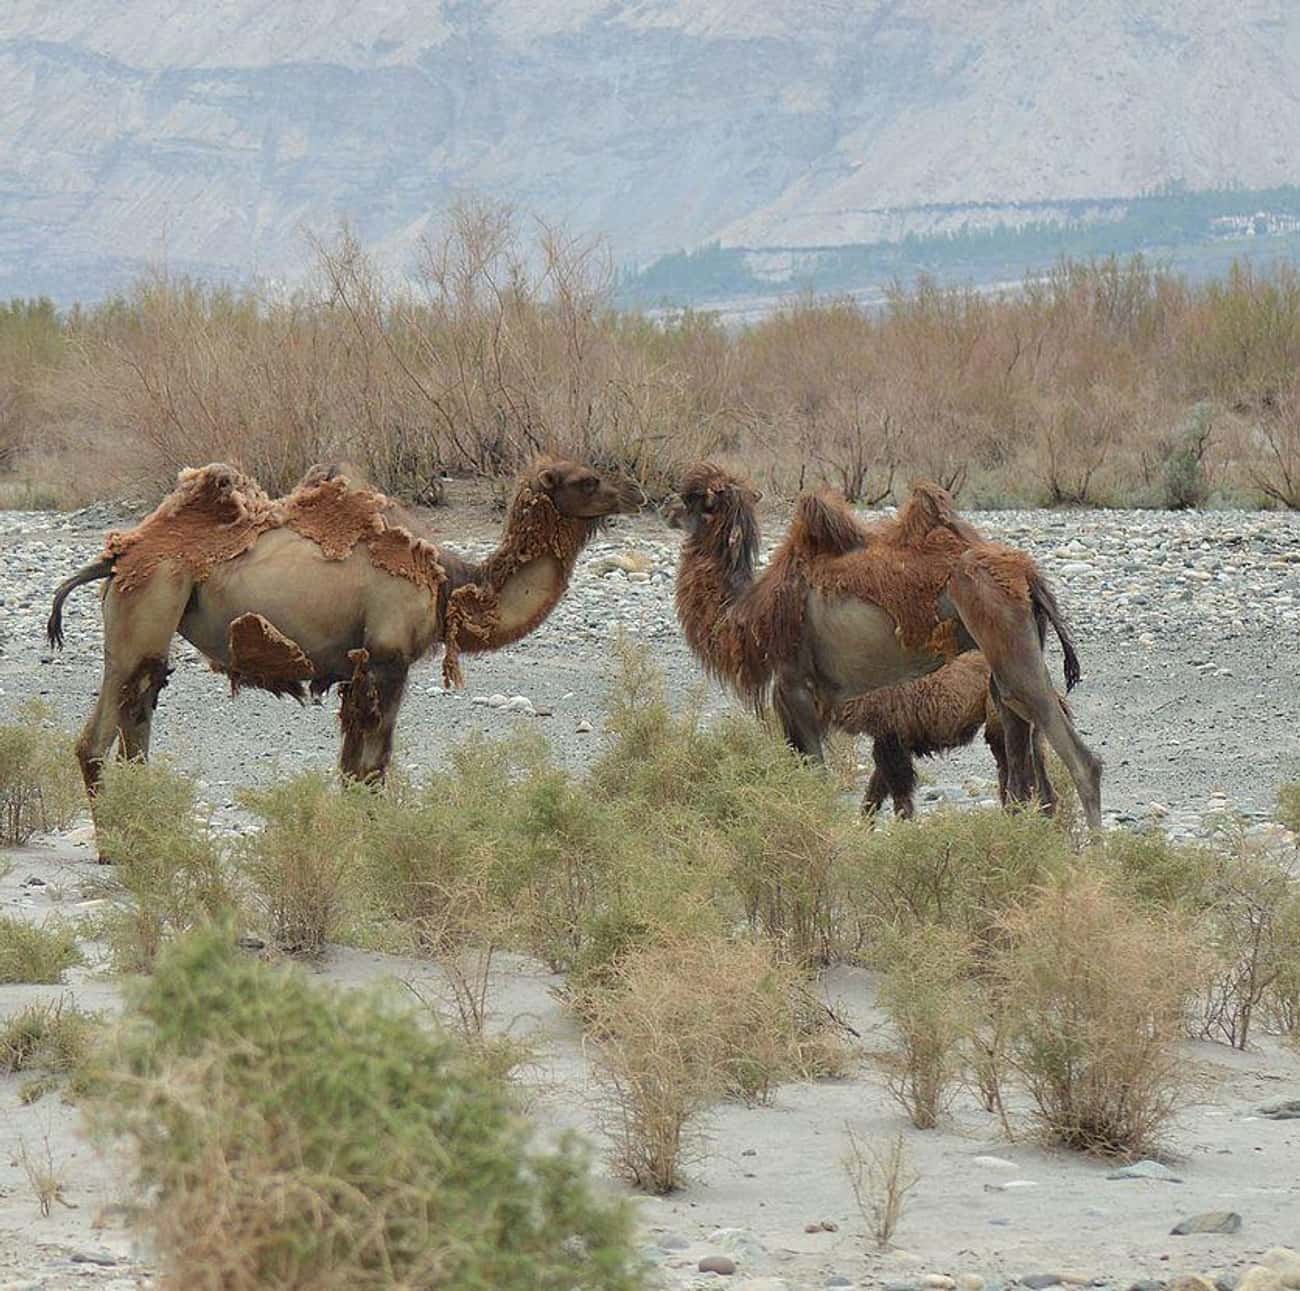 There Might&#39;ve Been More Wild Camels Than Horses